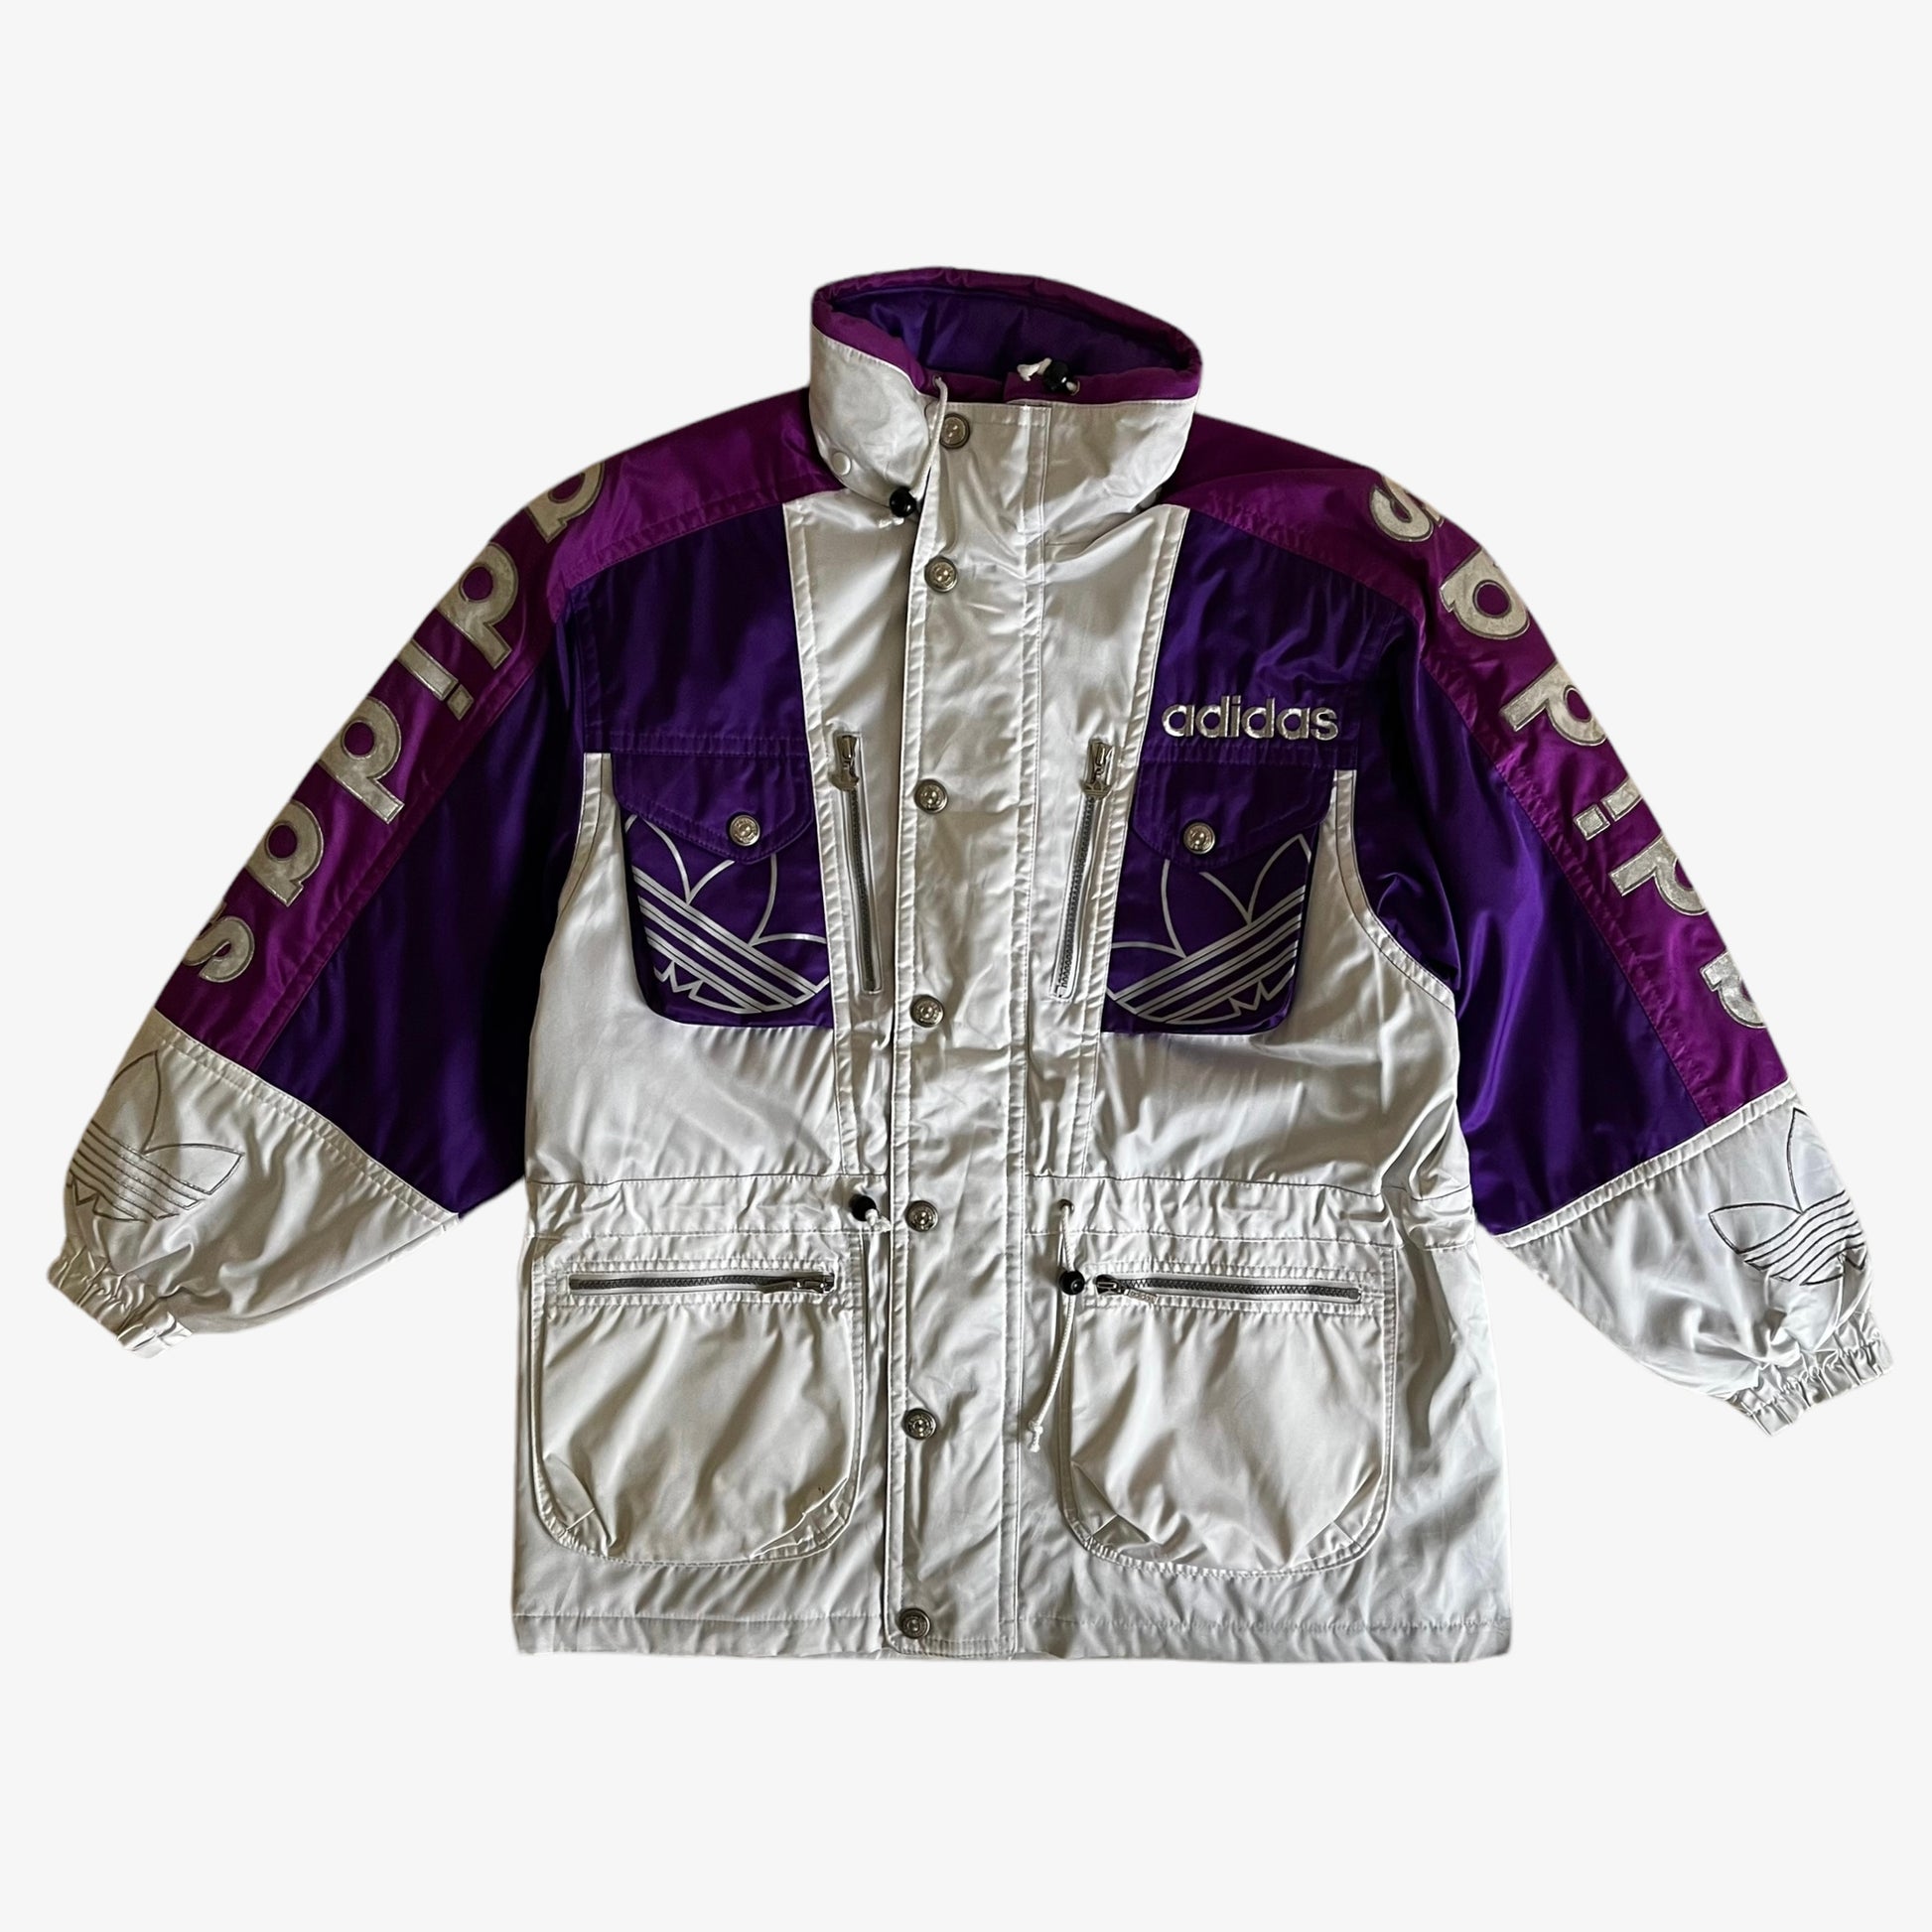 Vintage 90s Adidas Snow Gear Spell Out Jacket - Casspios Dream